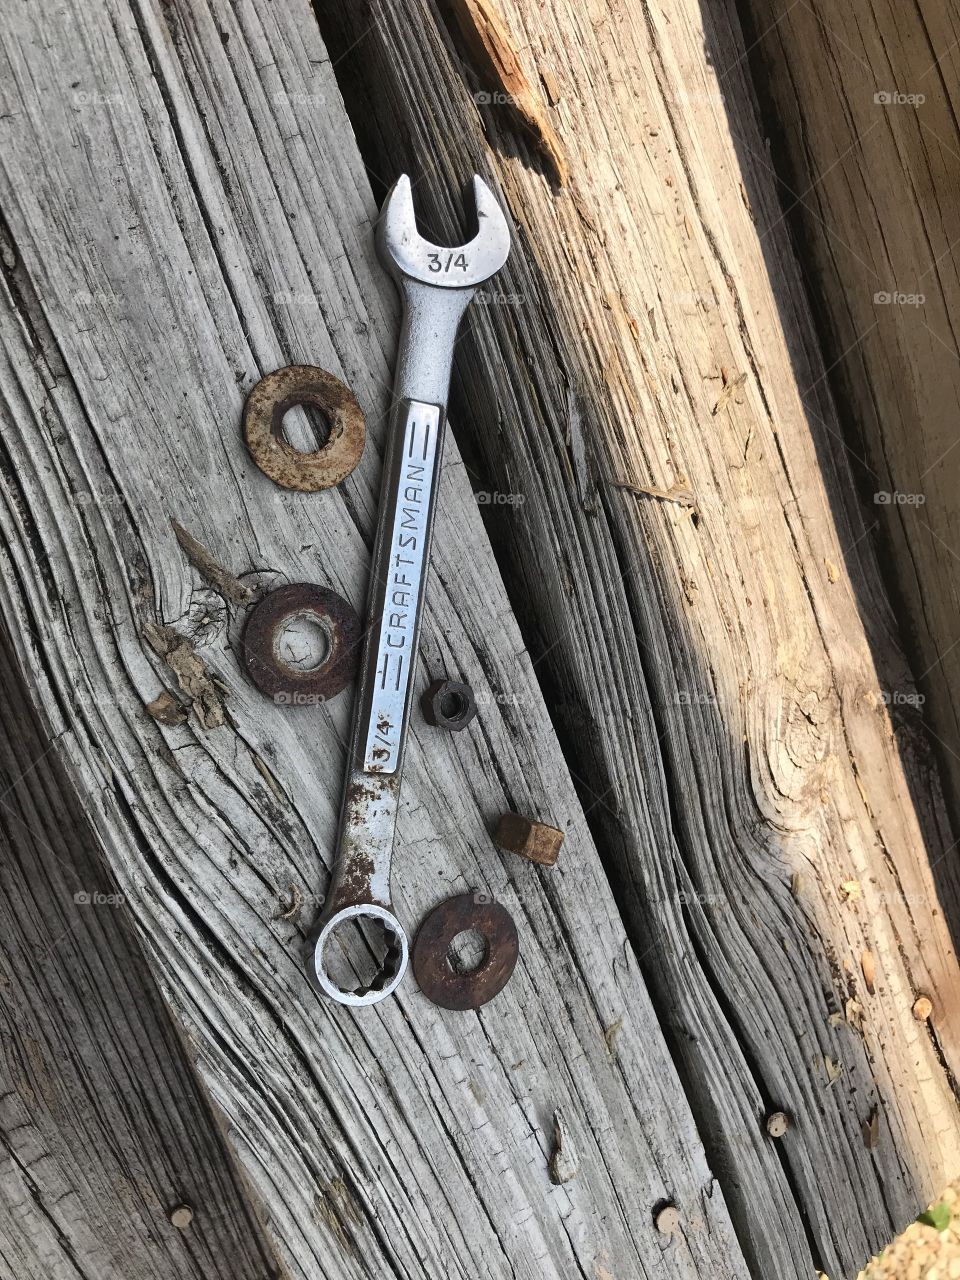 3/4 wrench